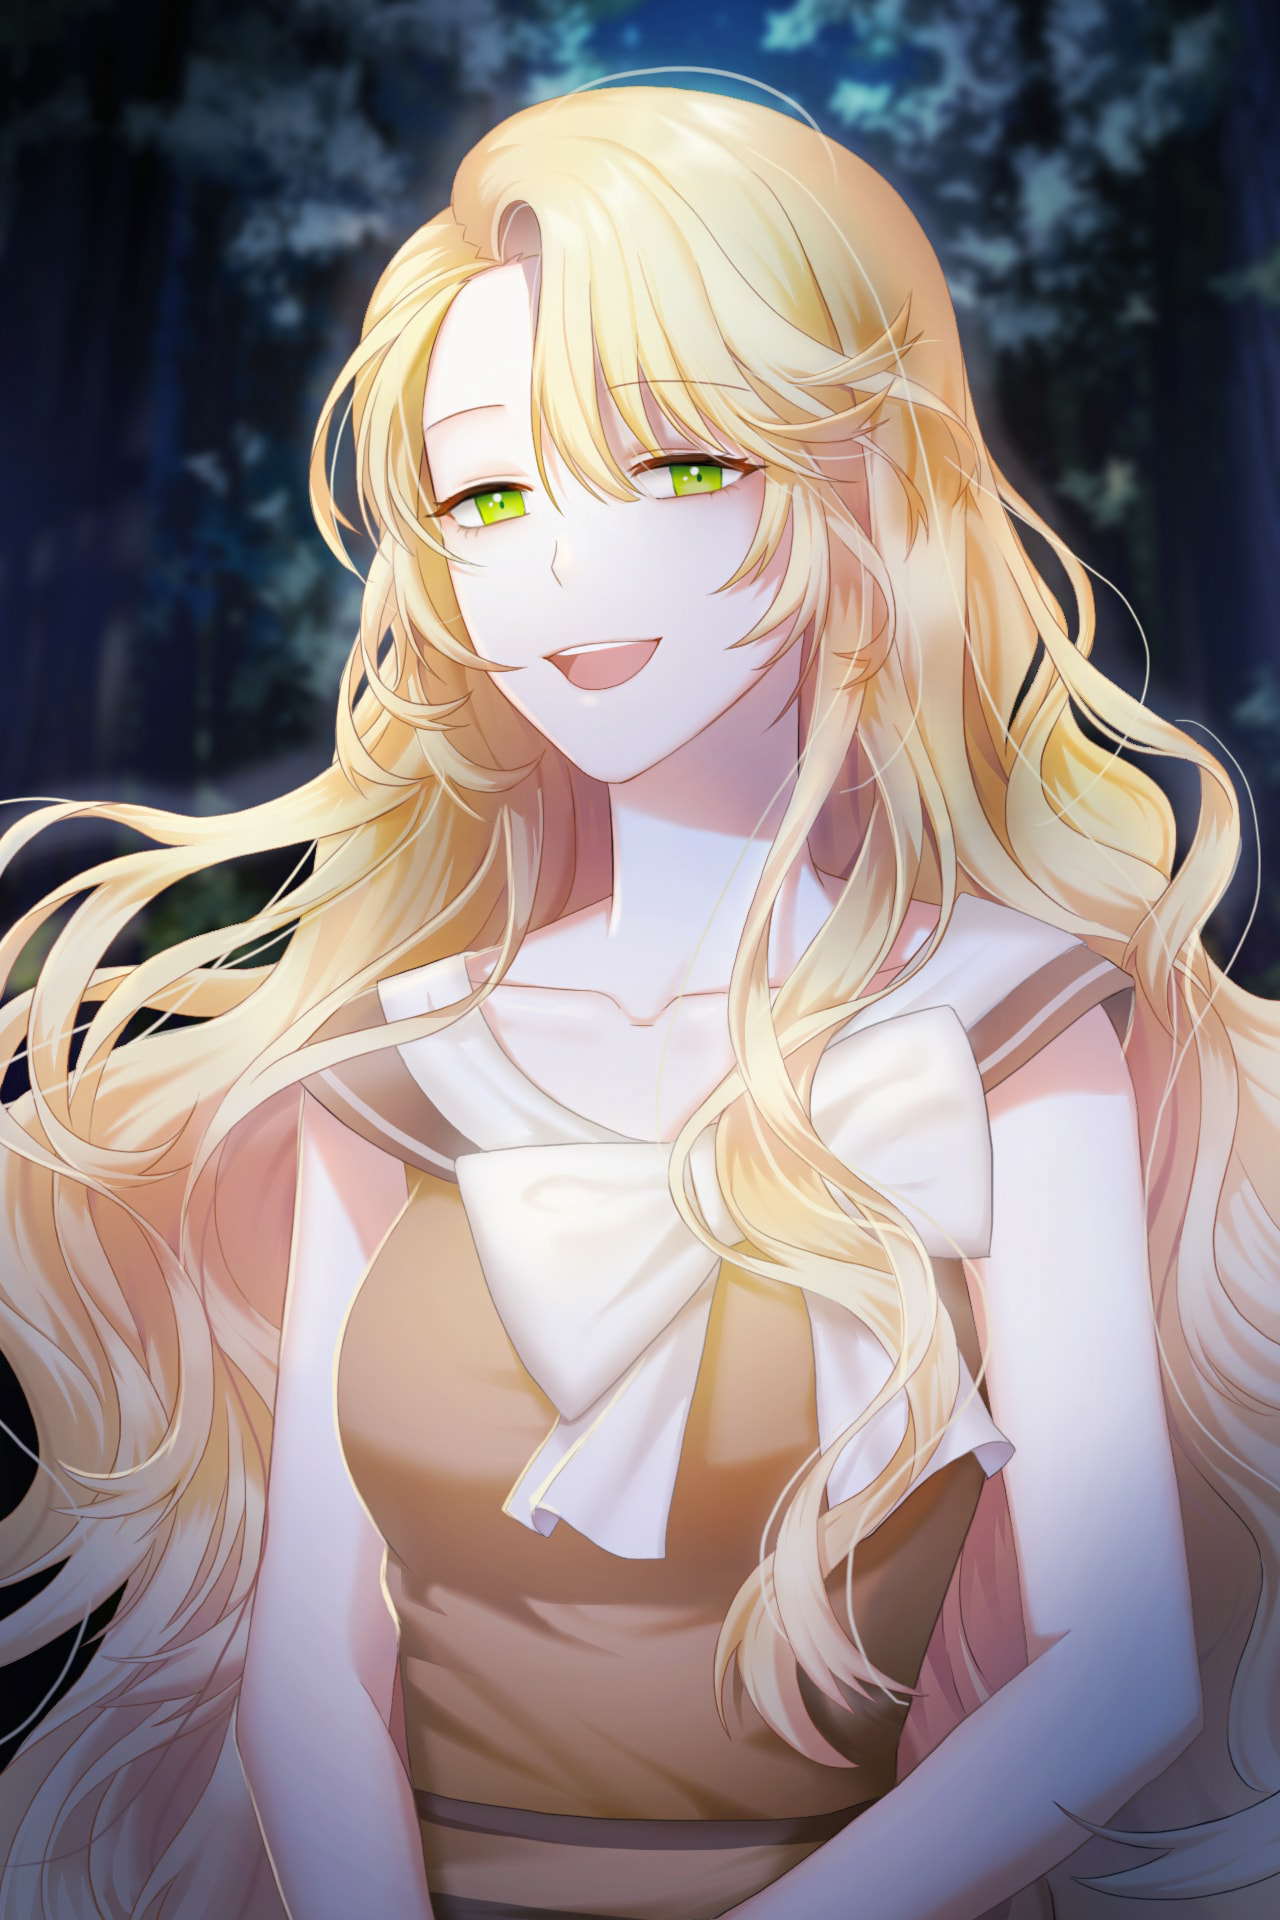 image-v-42-png-mystic-messenger-wiki-fandom-powered-by-wikia